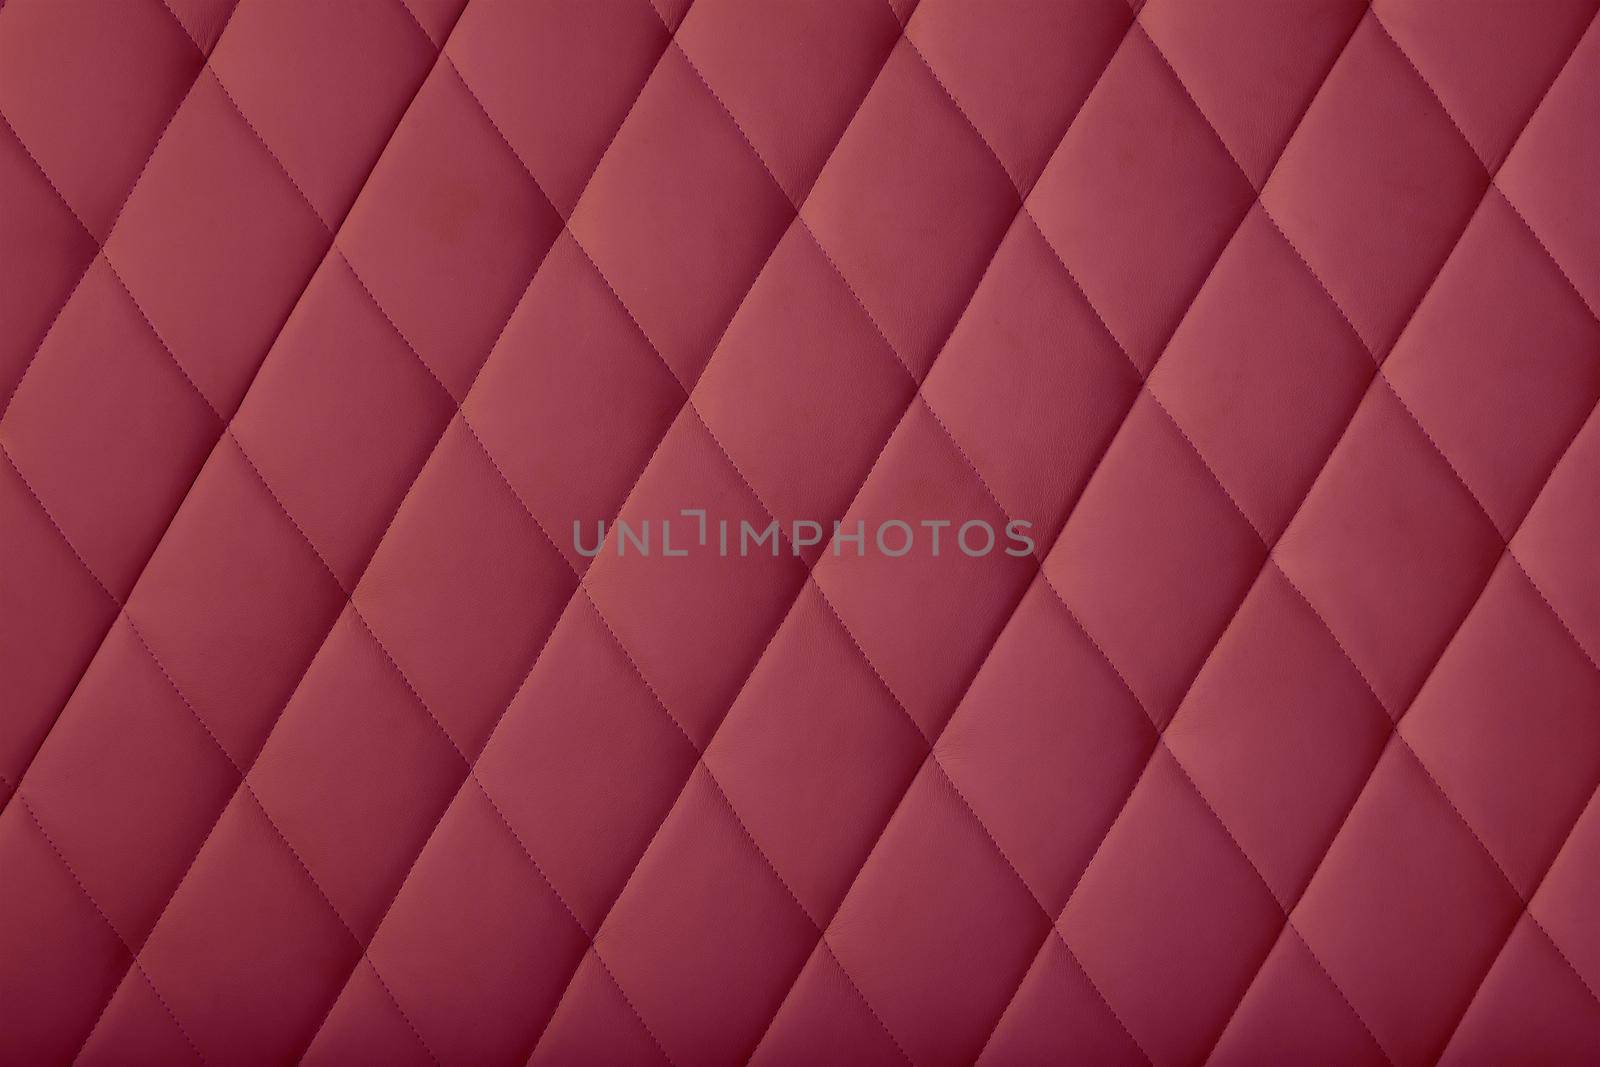 Background texture of burgundy purple soft tufted furniture or wall panel upholstery with deep diamond pattern, close up